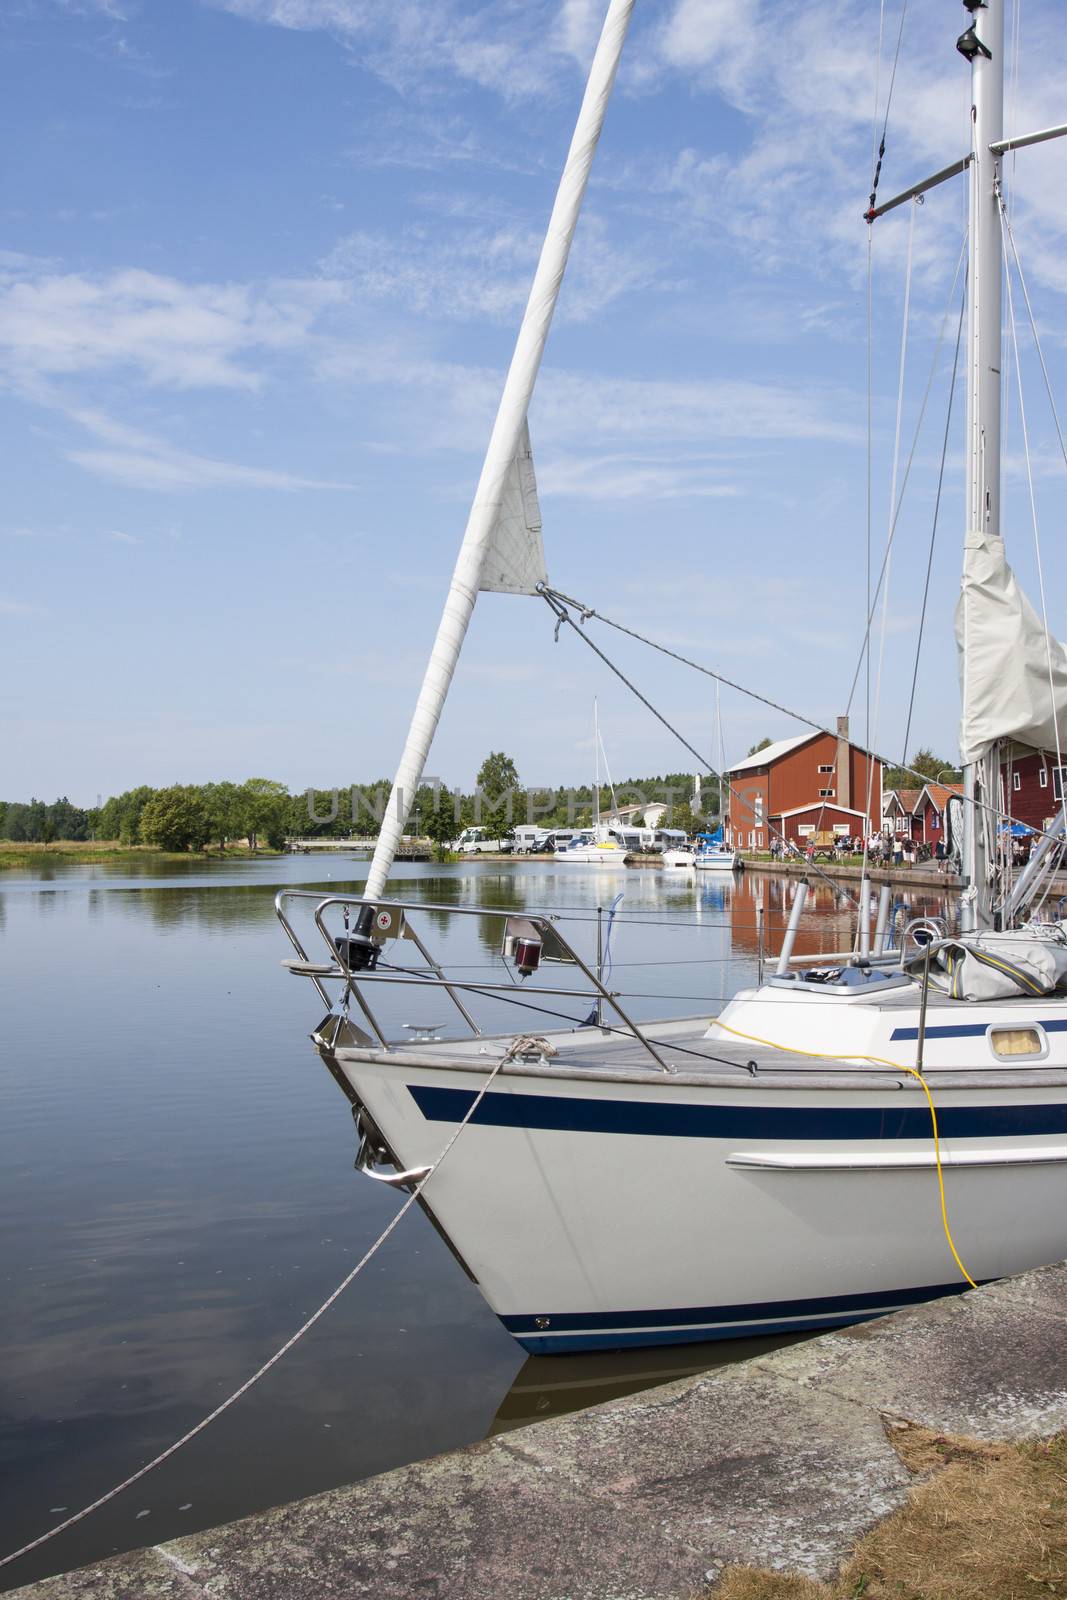 A harbor on the Gota Canal in Sweden with a yacht and other boats